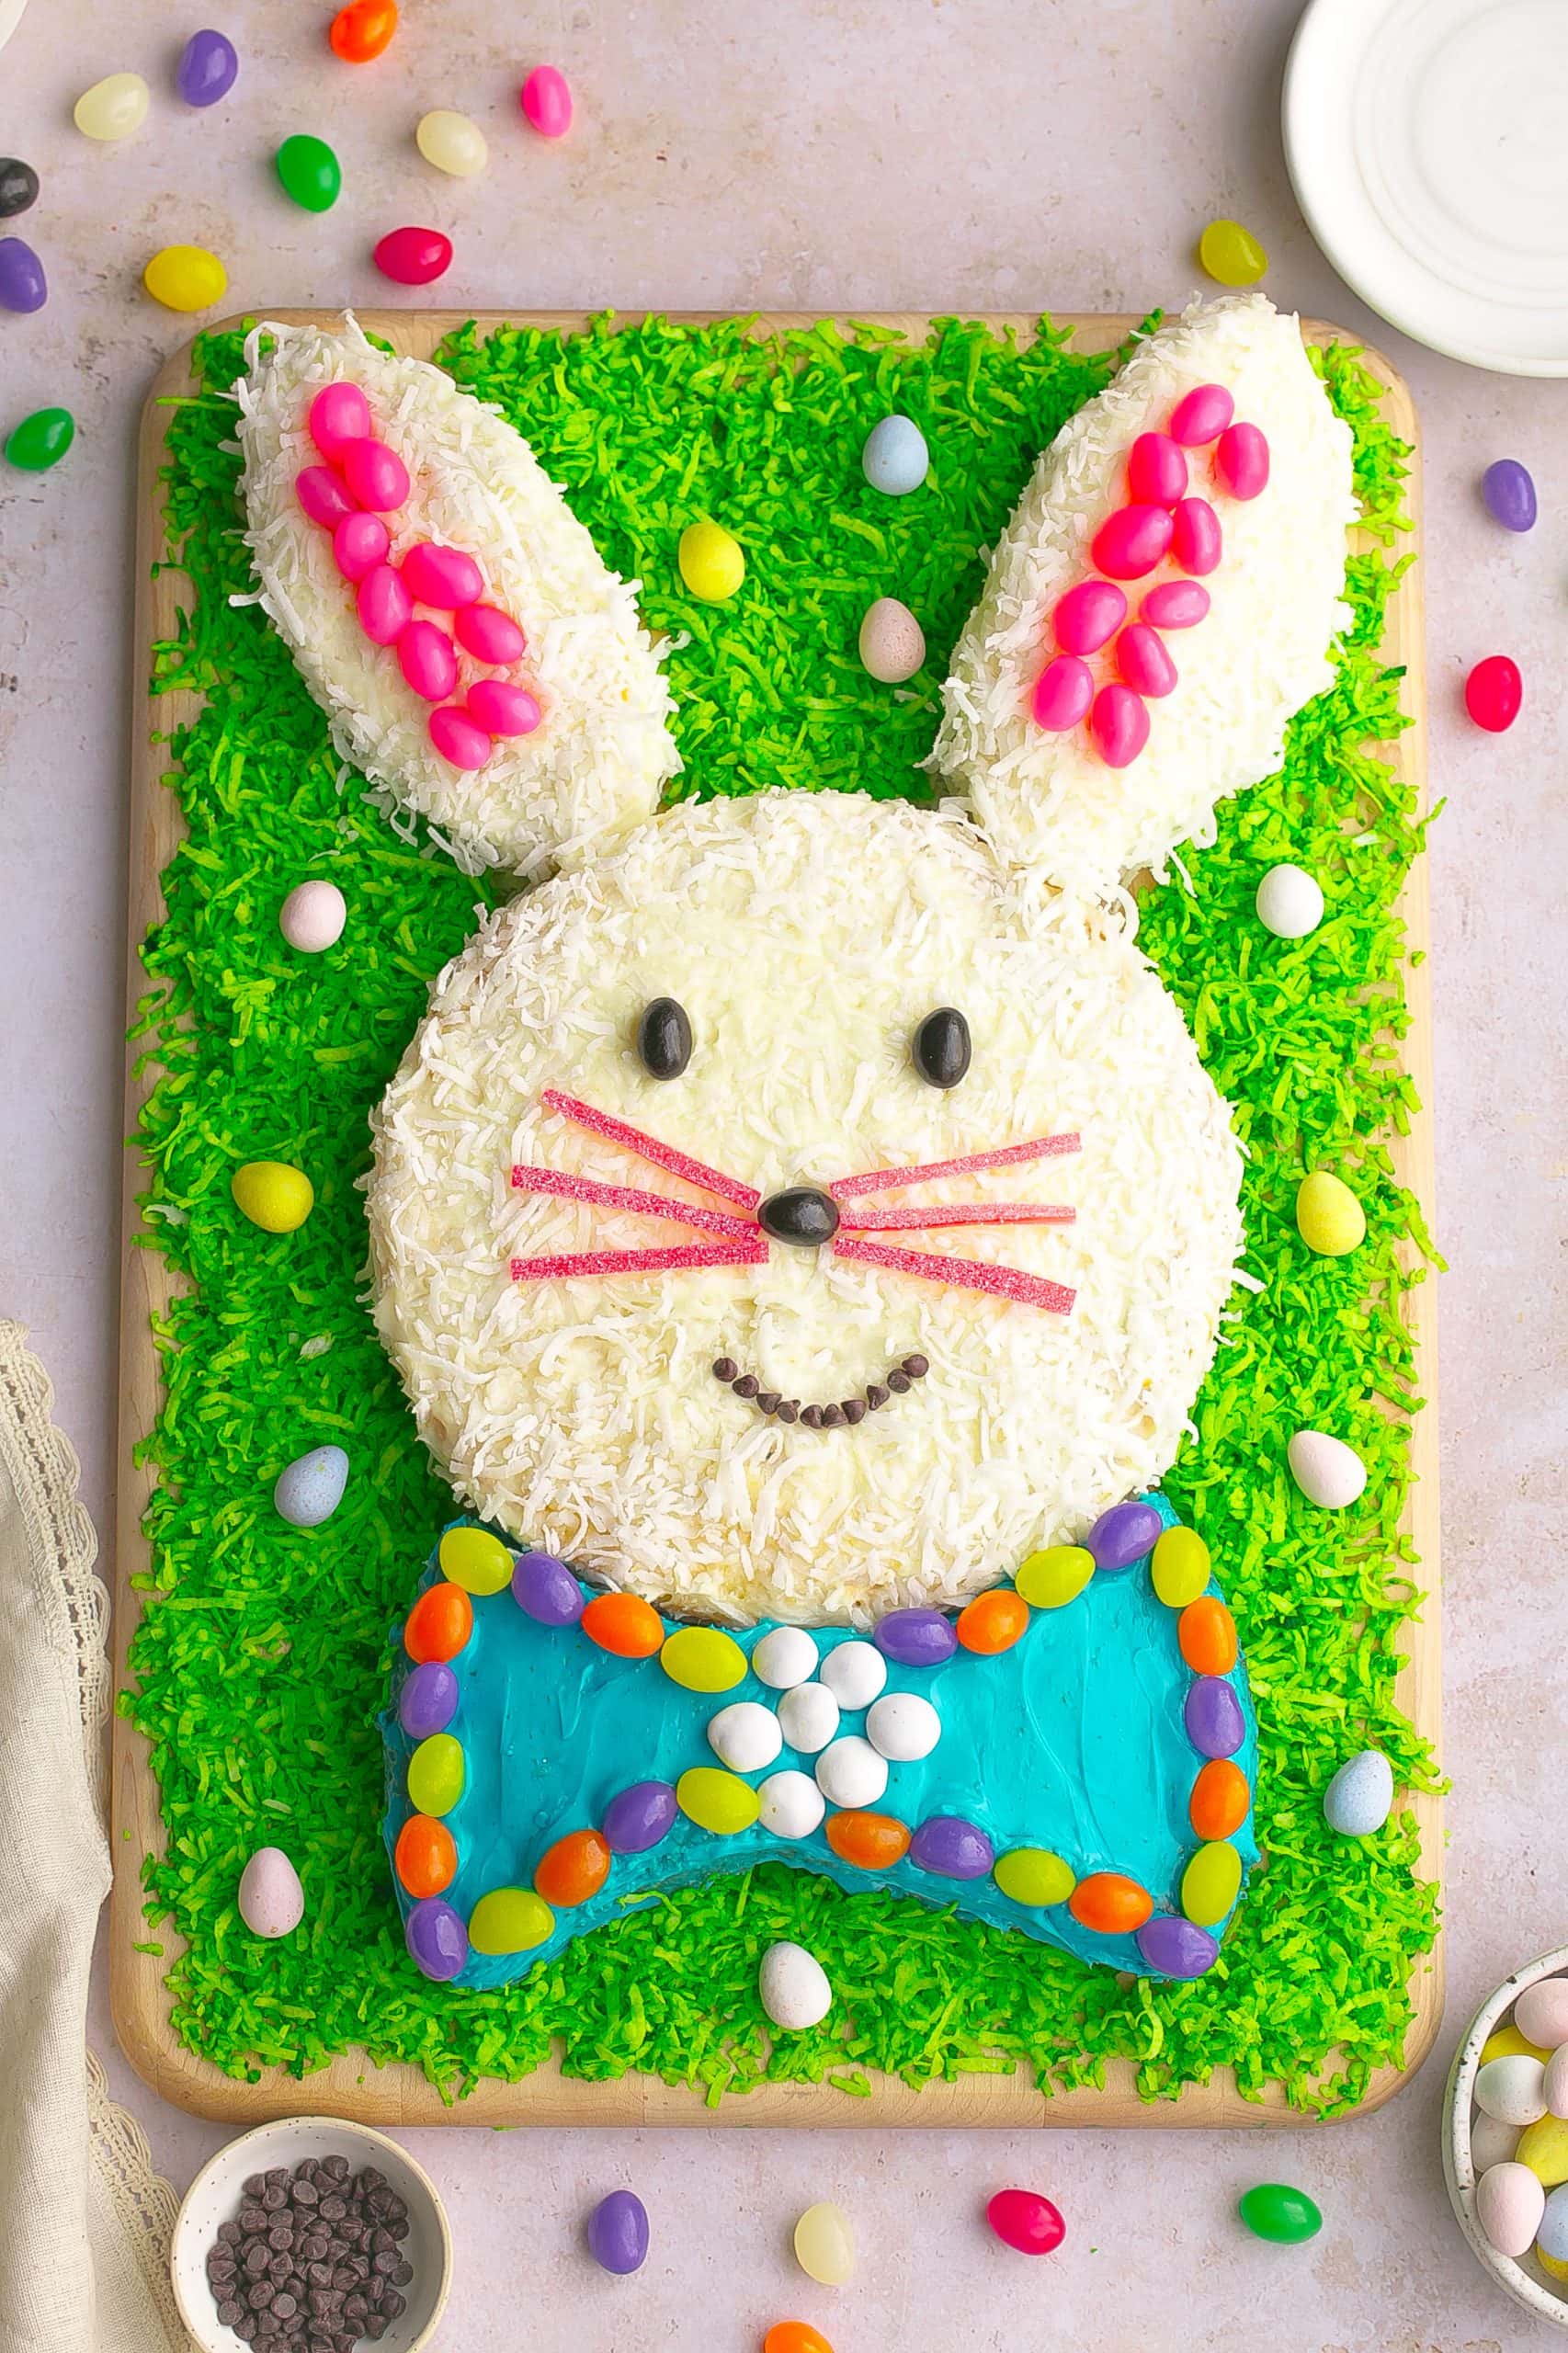 Decorated Easter Bunny Cake with coconut grass and candies.